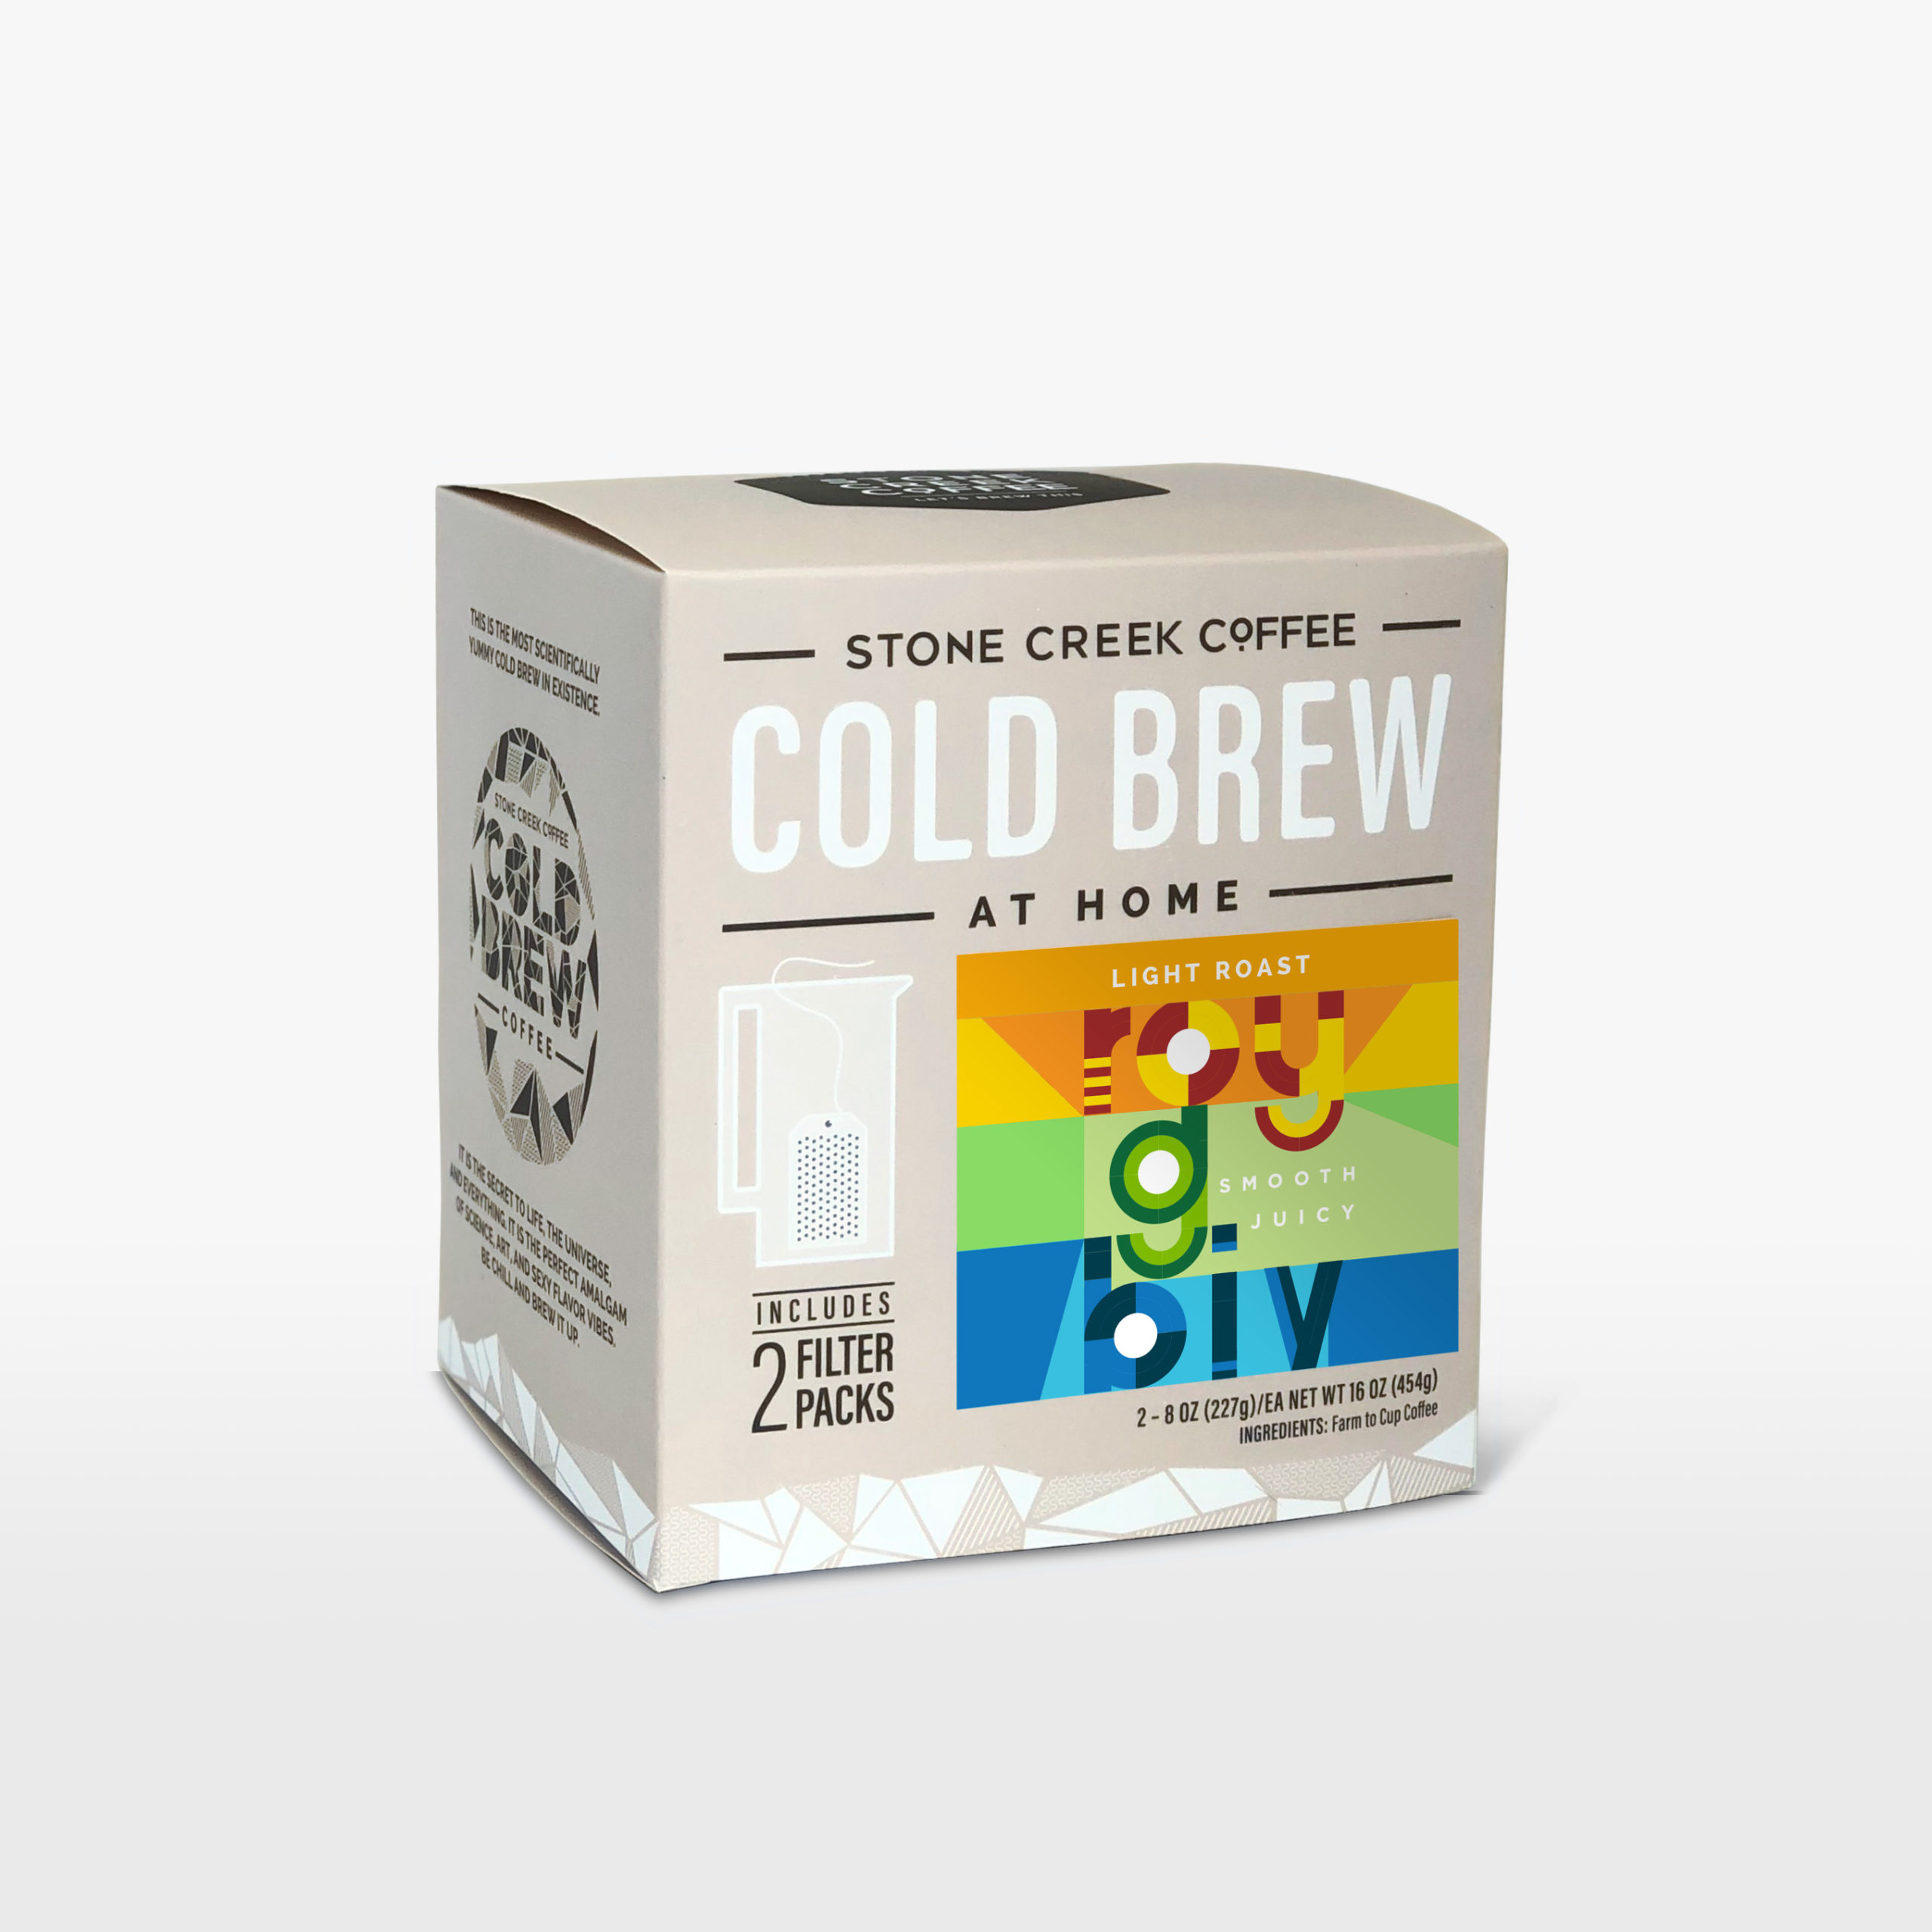 https://www.stonecreekcoffee.com/wp-content/uploads/2020/05/SCC_ColdBrew_FilterPack_RoyGBiv-1-scaled.jpg